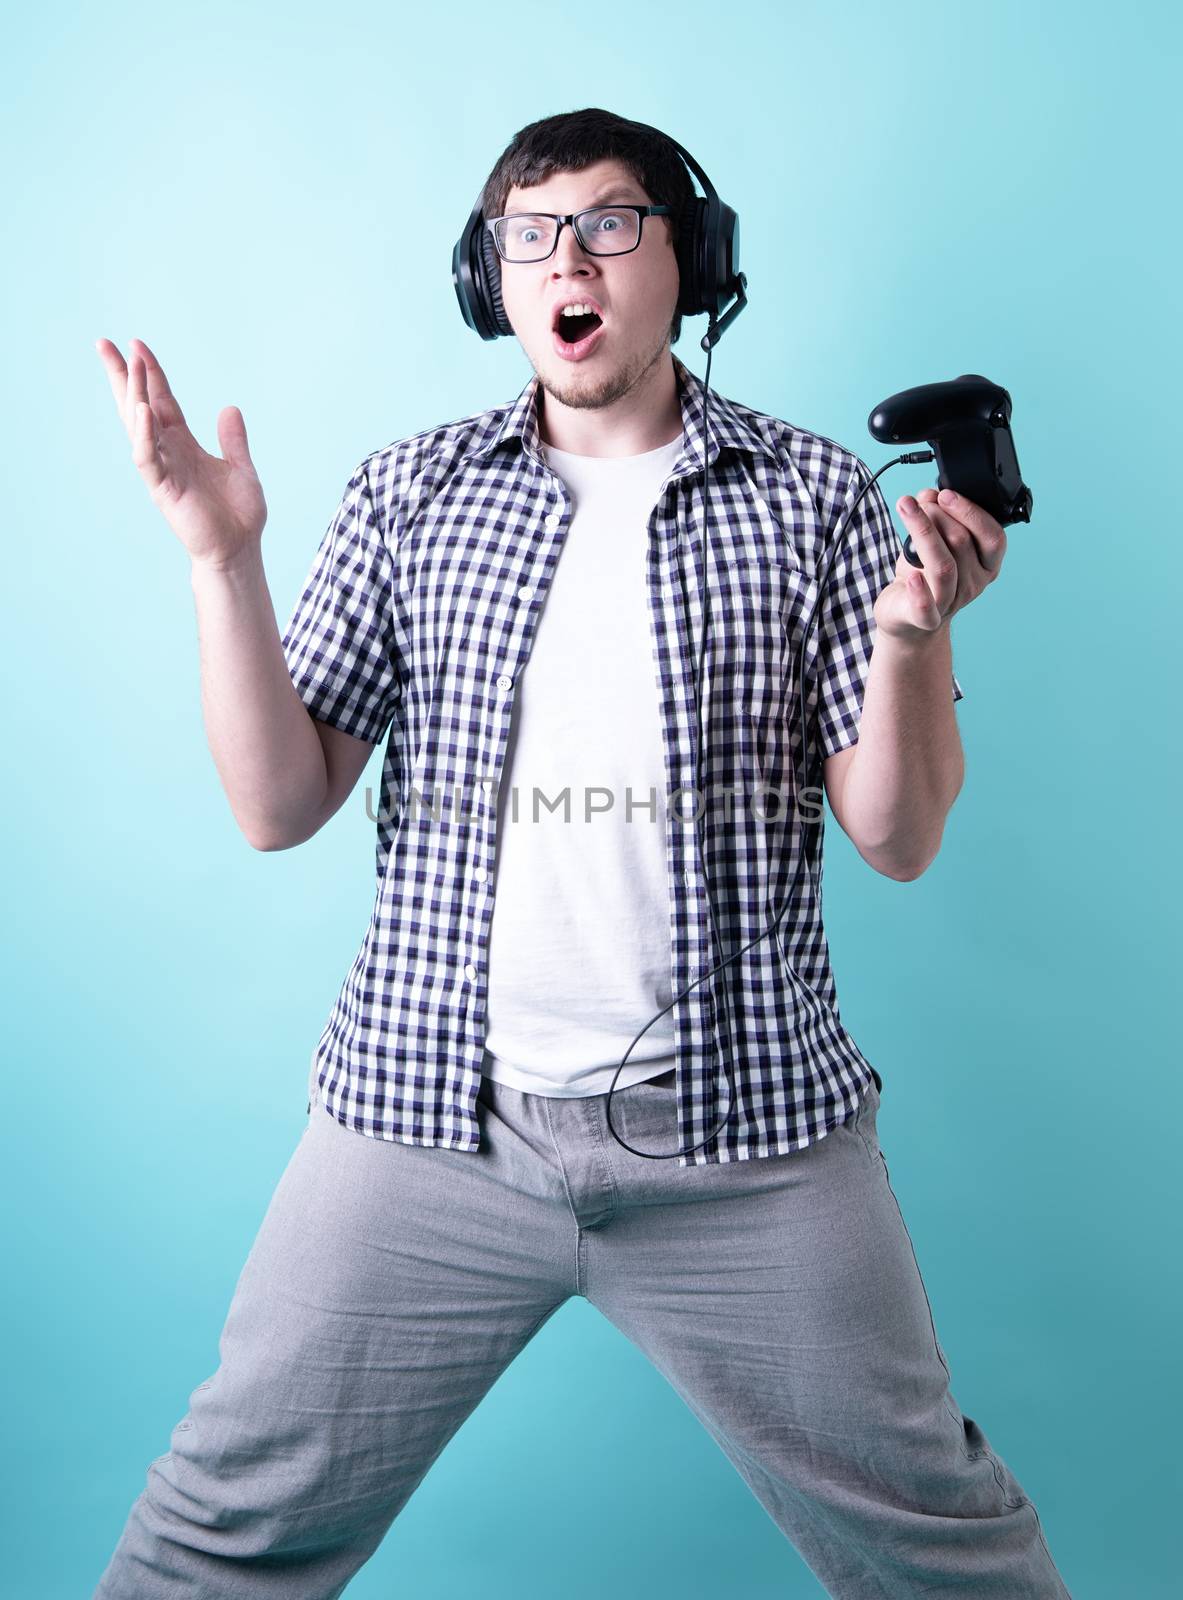 Shocked young man playing video games holding a joystick isolated on blue background by Desperada